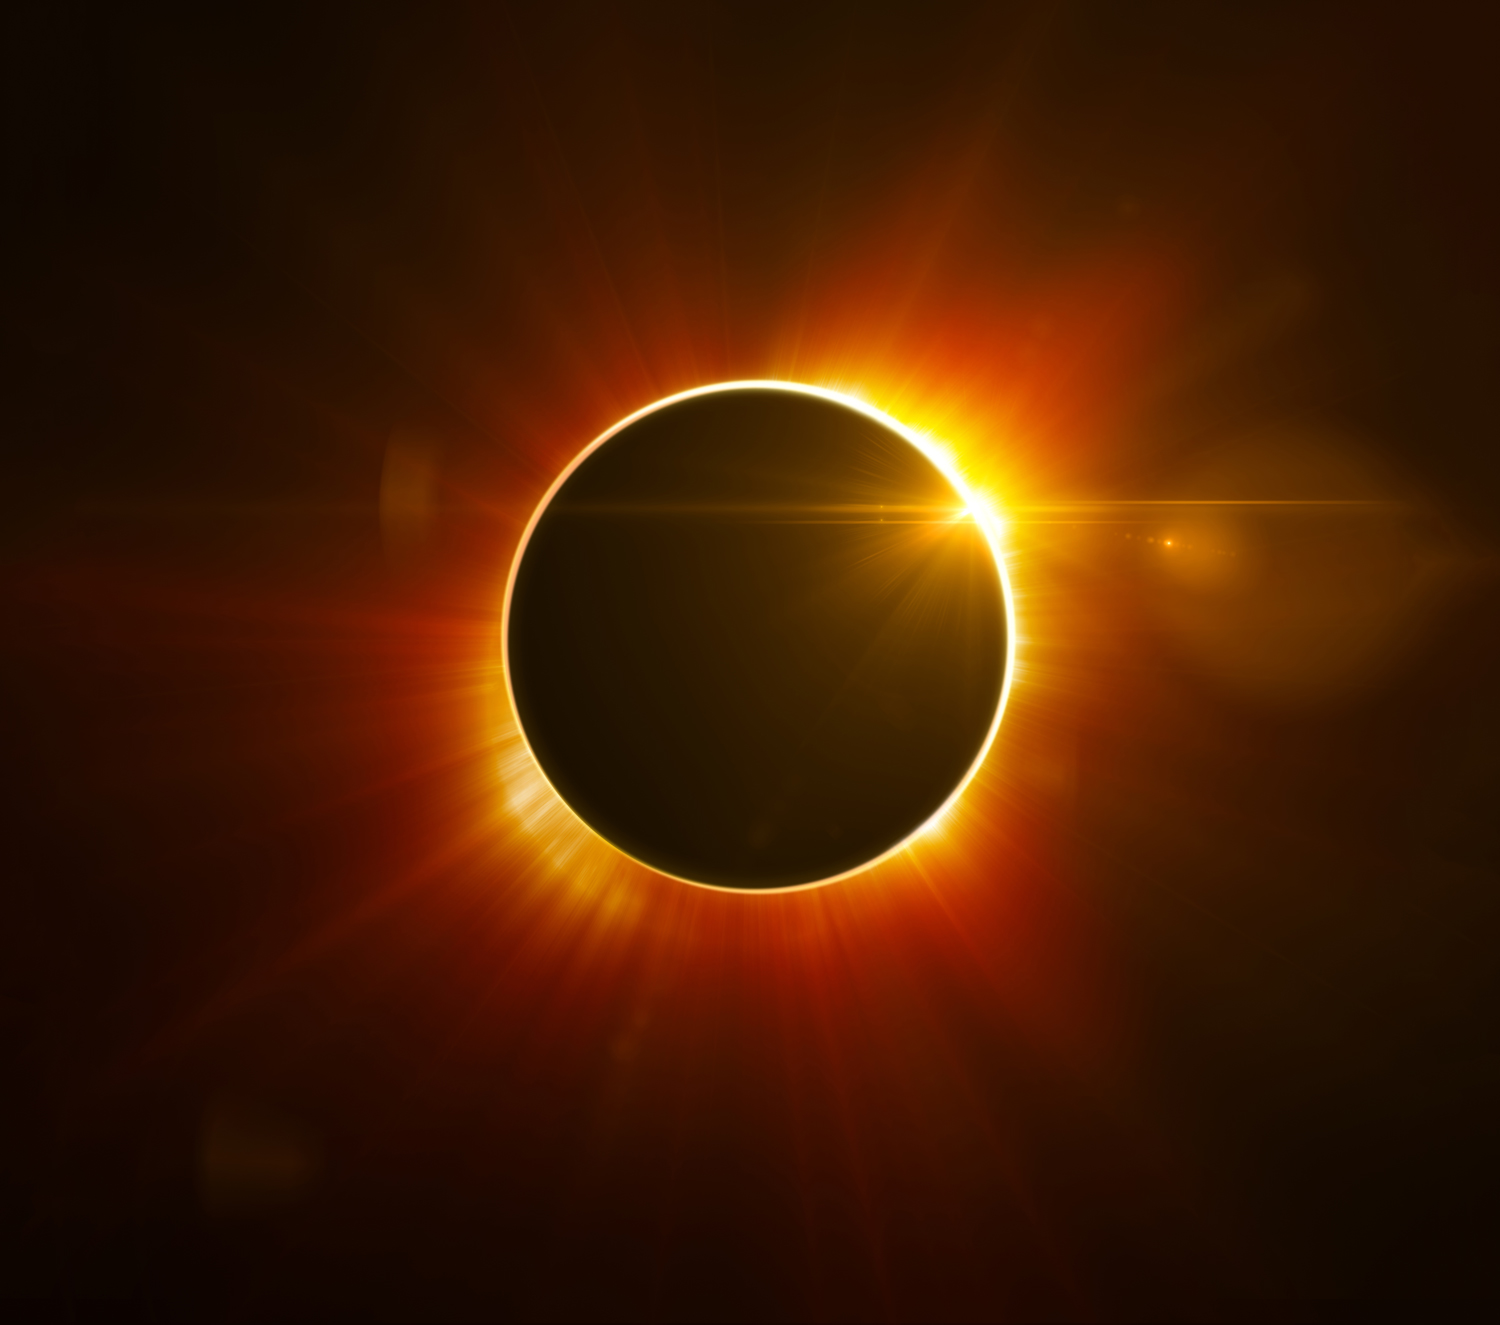 A total solar eclipse is shown at totality.